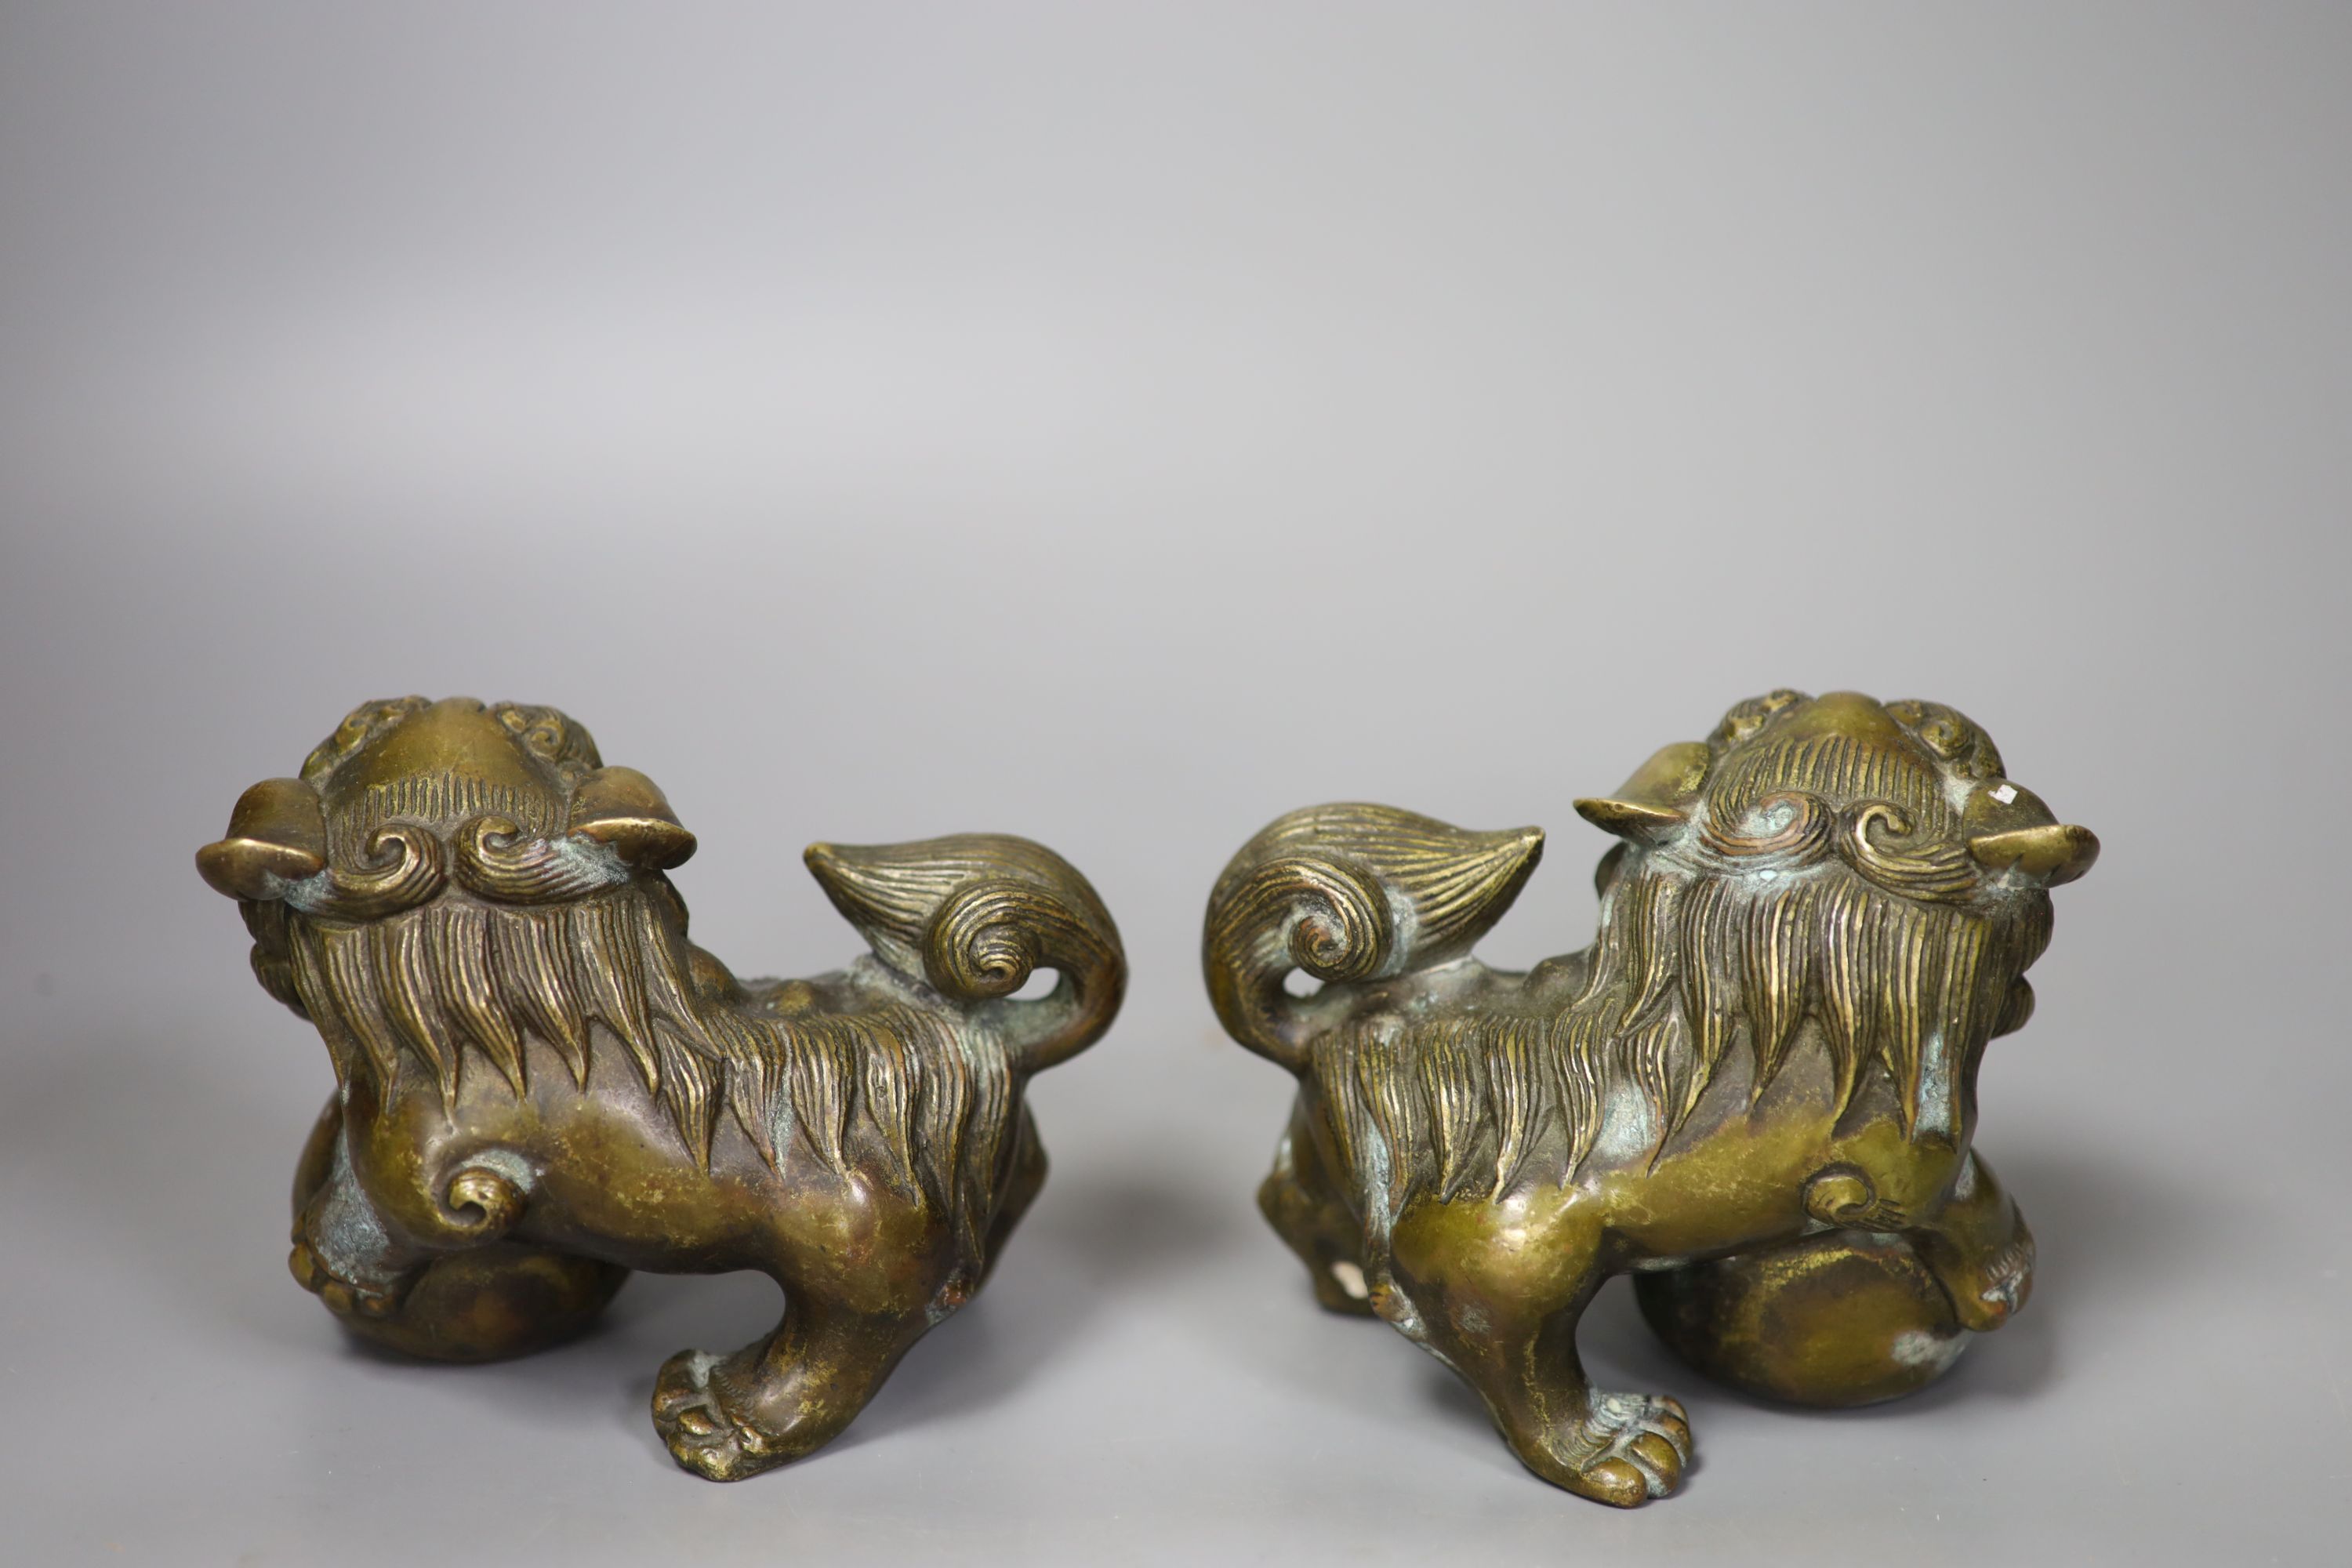 A pair of 20th century cast metal Chinese temple lions (filled). 11cm. long, 11cm. high.